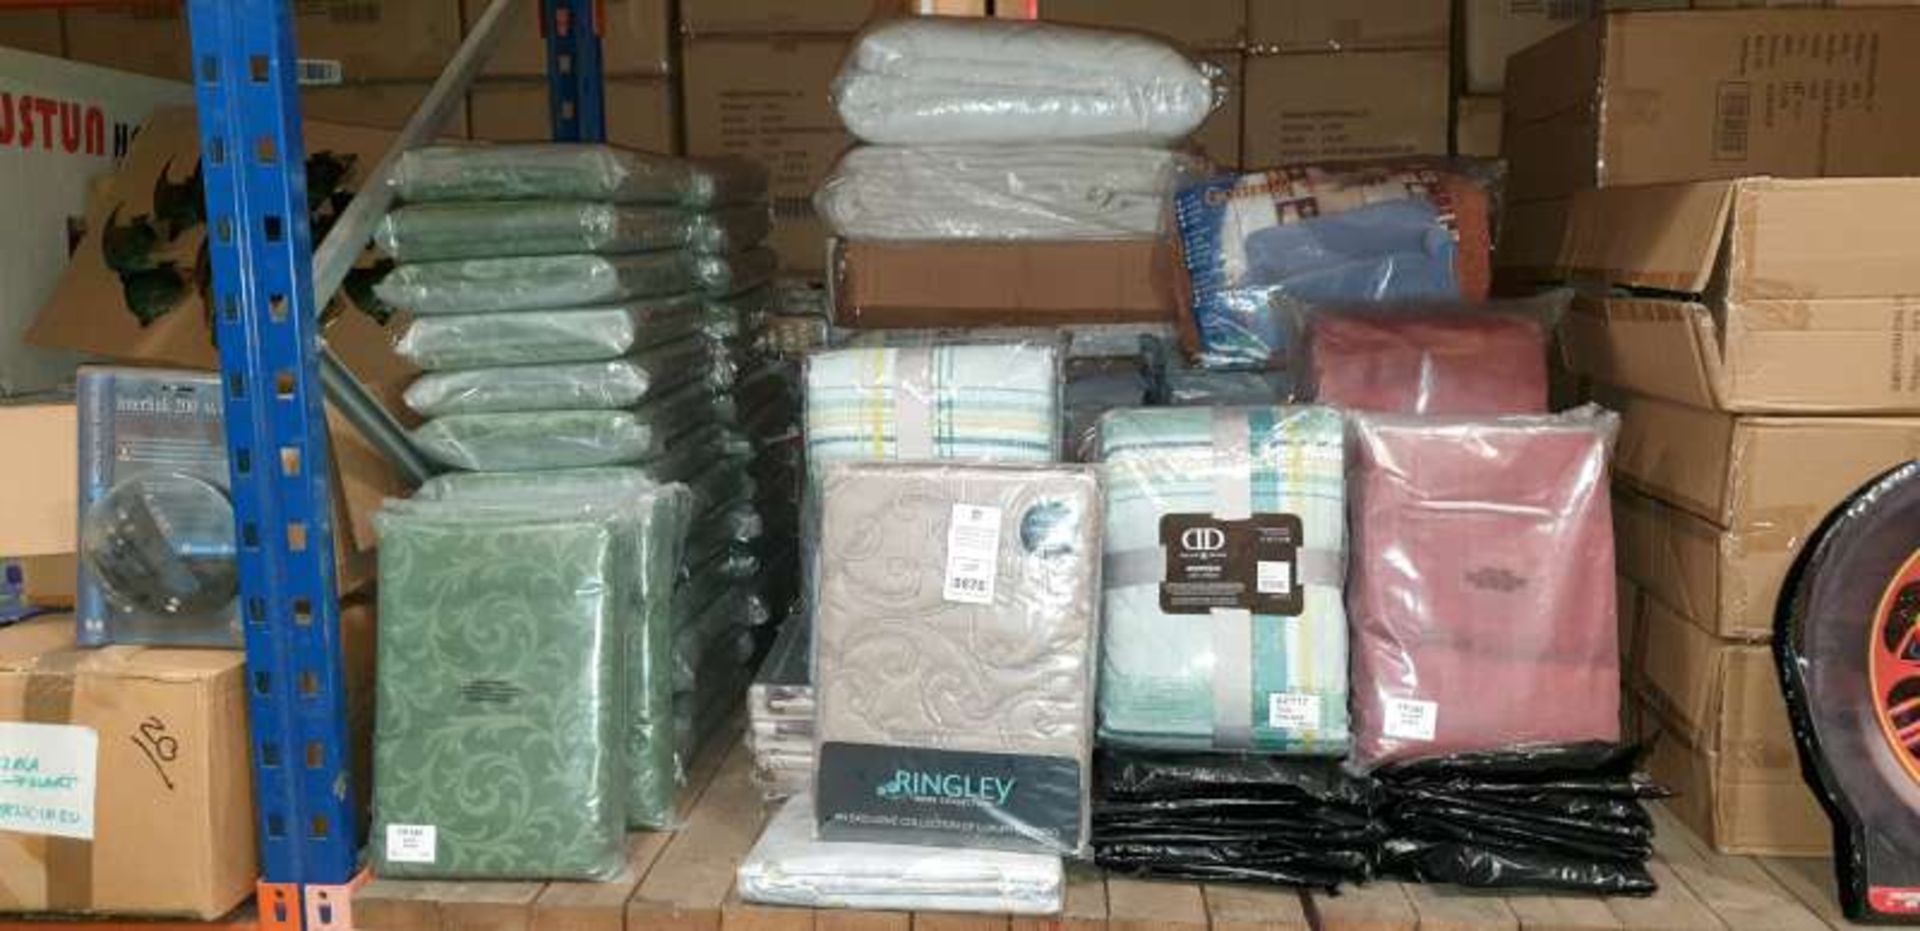 LOT CONTAINING A QTY OF BEDDING / THROWS / SOFA COVERS IN VARIOUS STYLES, SIZES, COLOURS